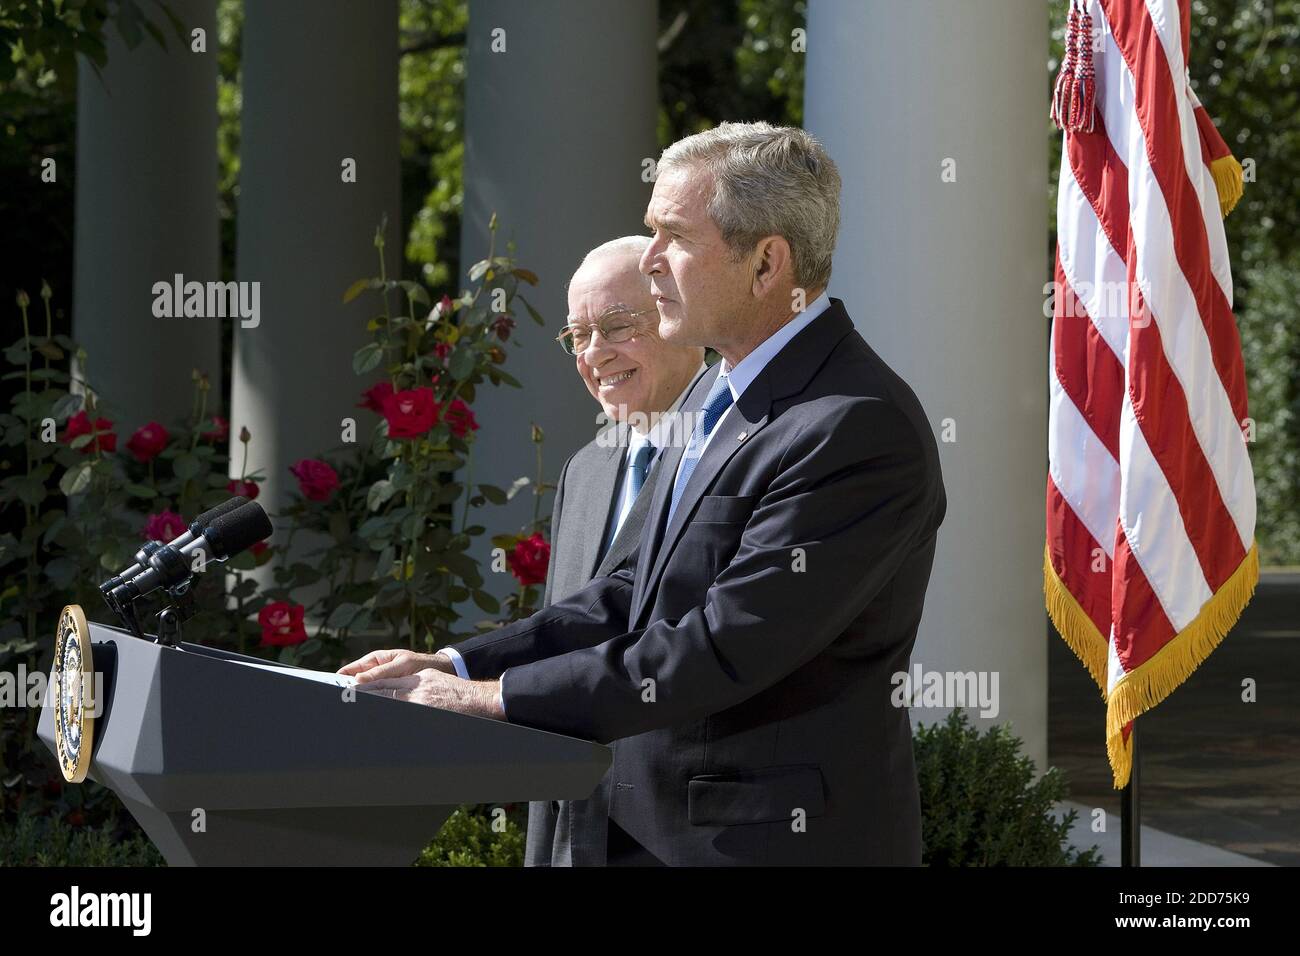 NO FILM, NO VIDEO, NO TV, NO DOCUMENTARY - President George W. Bush announces his nominee for the new U.S. Attorney General, retired New York judge Michael Mukasey (left), in the Rose Garden of the White House in Washington, D.C., USA on September 17, 2007. Mukasey, 66, would replace Alberto Gonzales, who resigned last month after he became embroiled in controversy over the firings of nine federal prosecutors. Photo by Chuck Kennedy/MCT/ABACAPRESS.COM Stock Photo